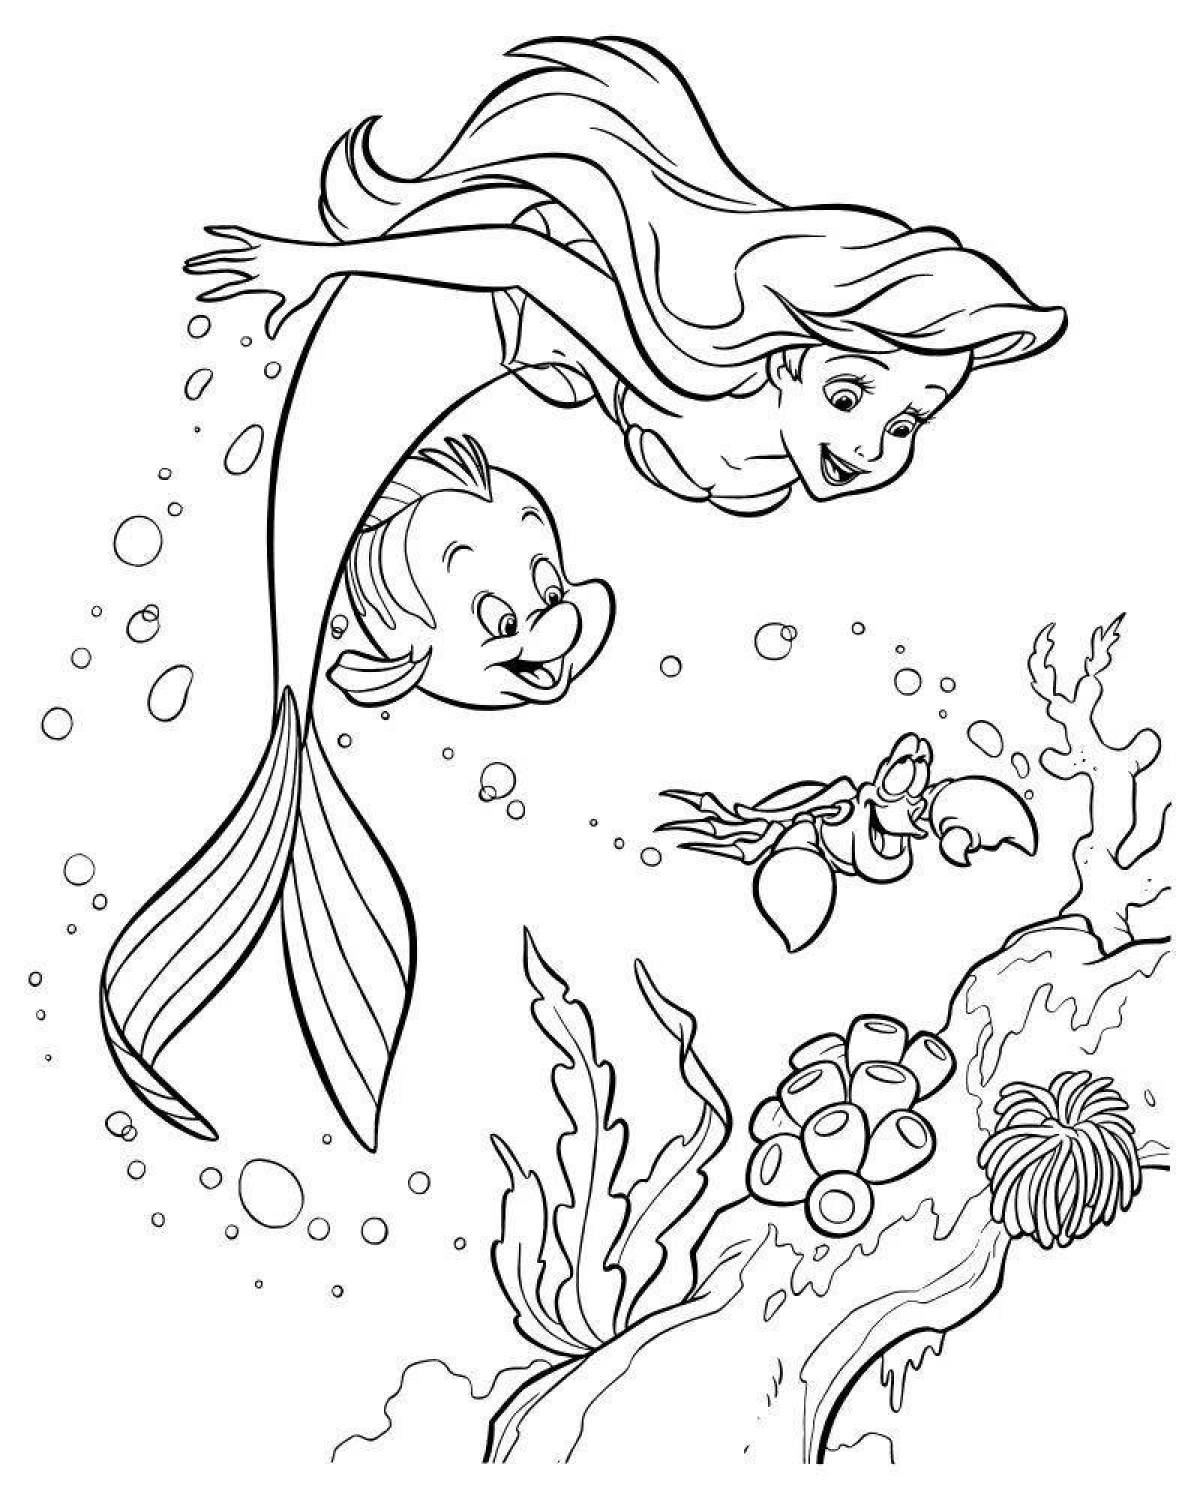 Playful ariel coloring page for kids